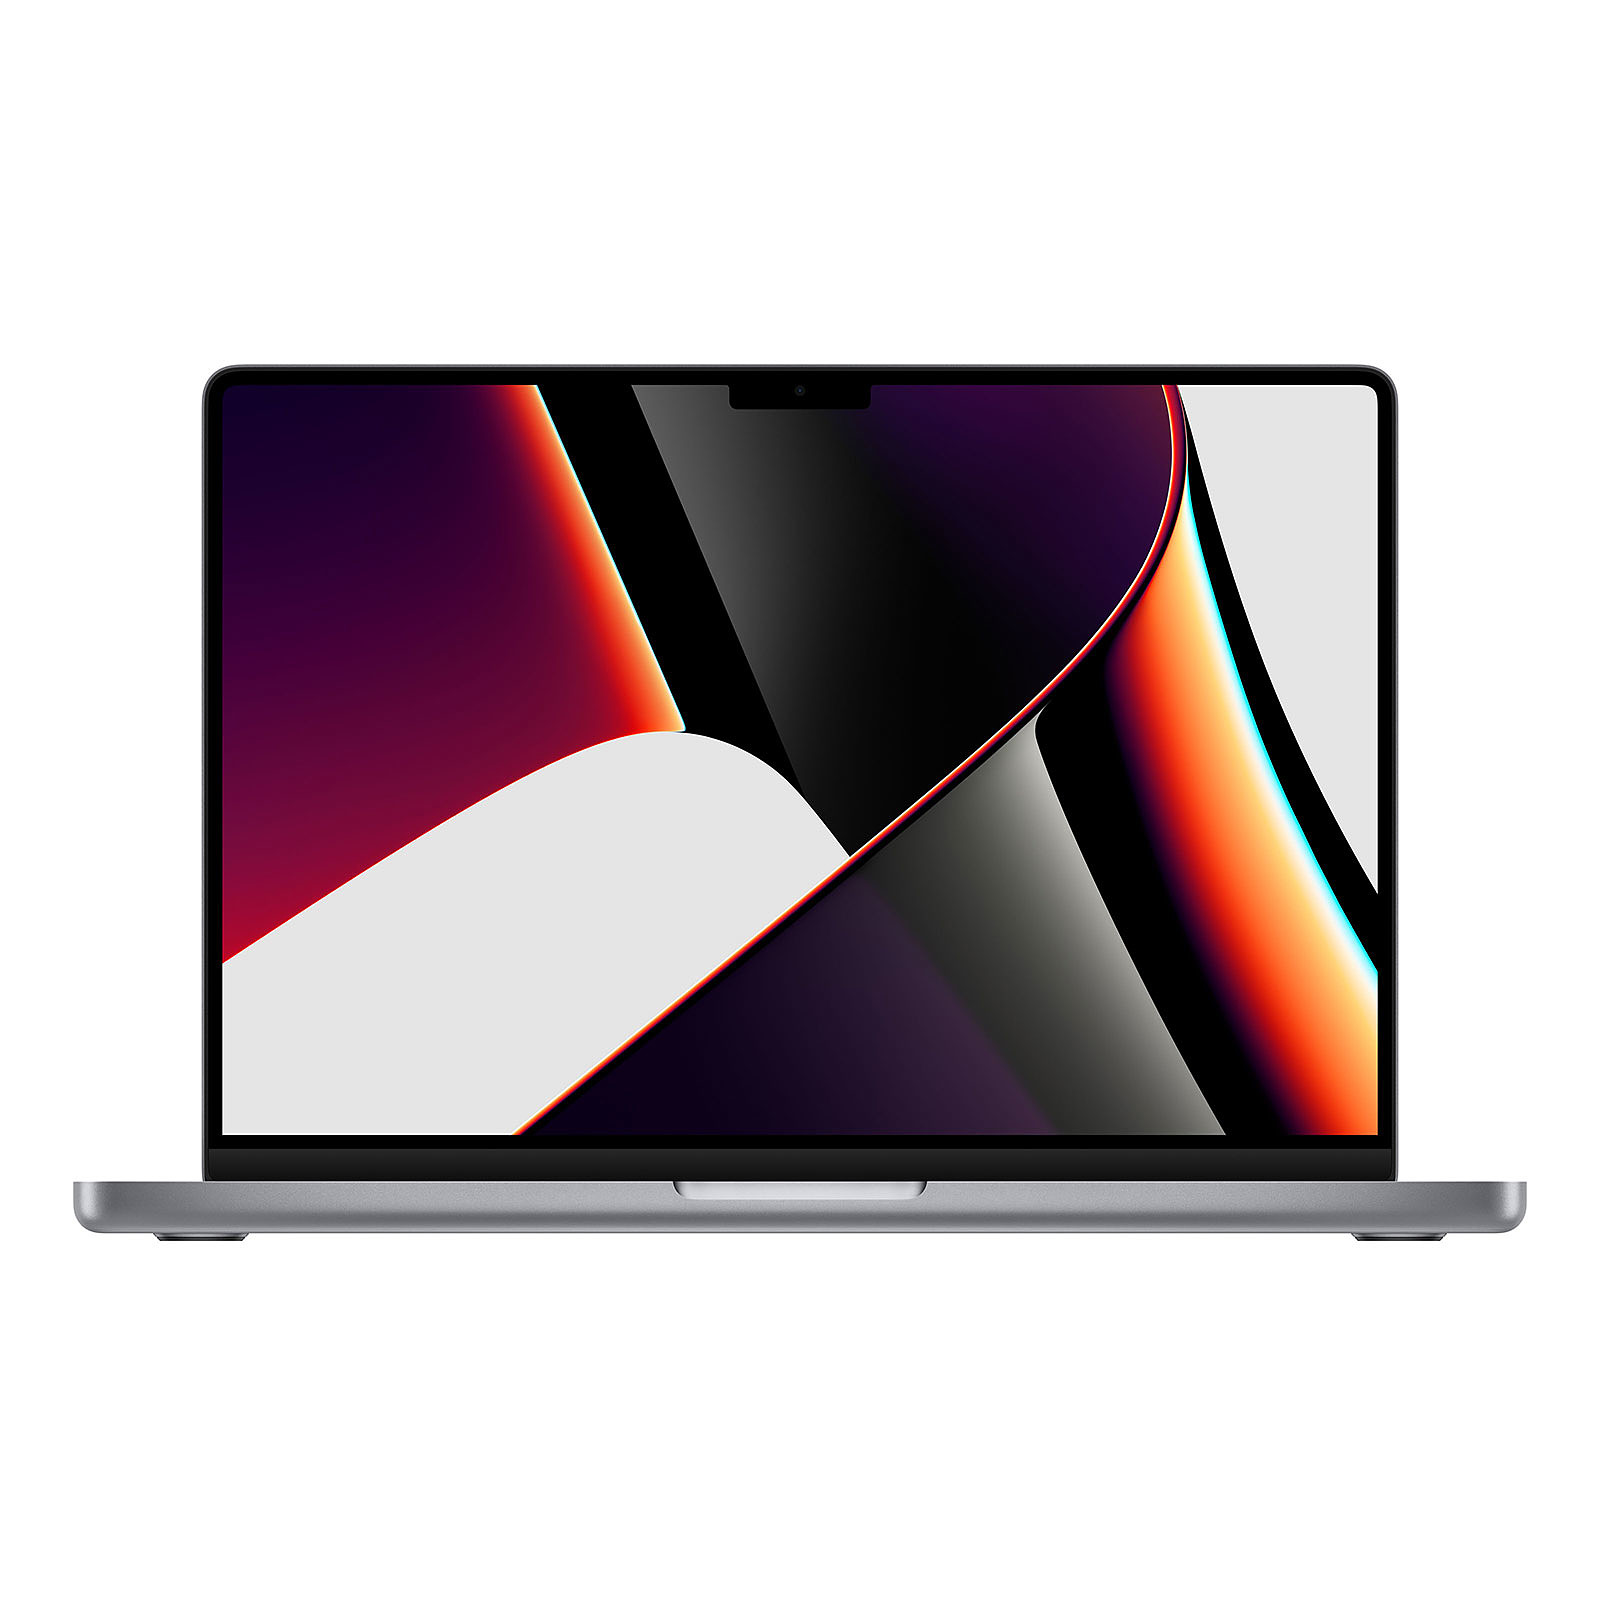 Apple MacBook Pro M1 Pro (2021) 14" Gris sideral 16Go/2To (MKGQ3FN/A-2TB) - MacBook Apple